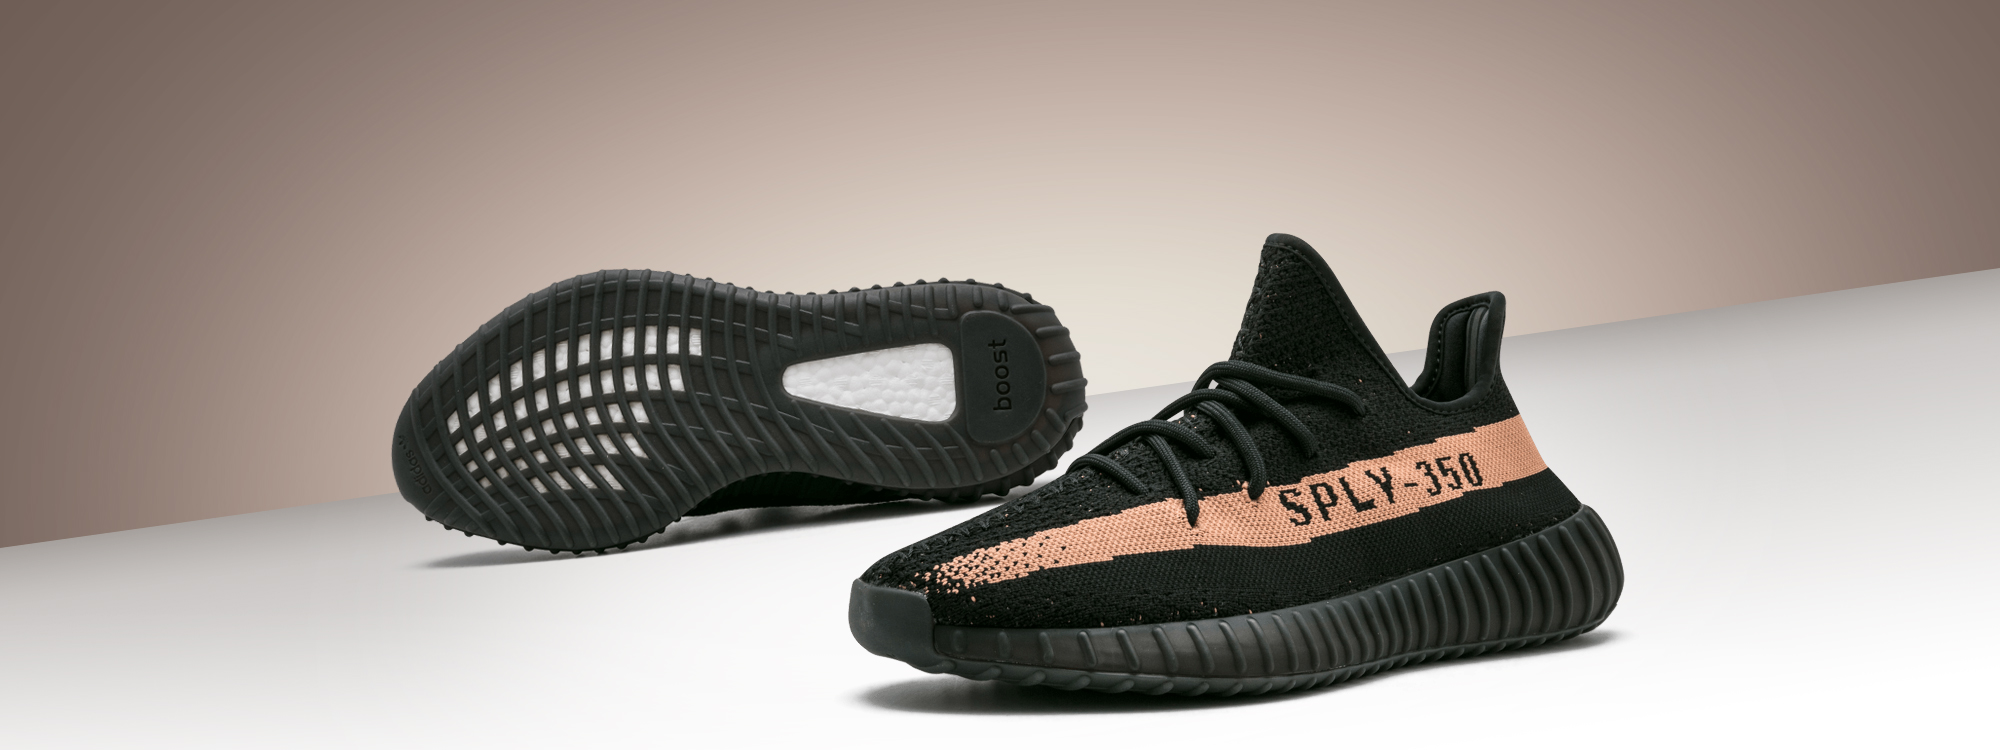 price of new  Yeezy Boost 350 V2 Copper